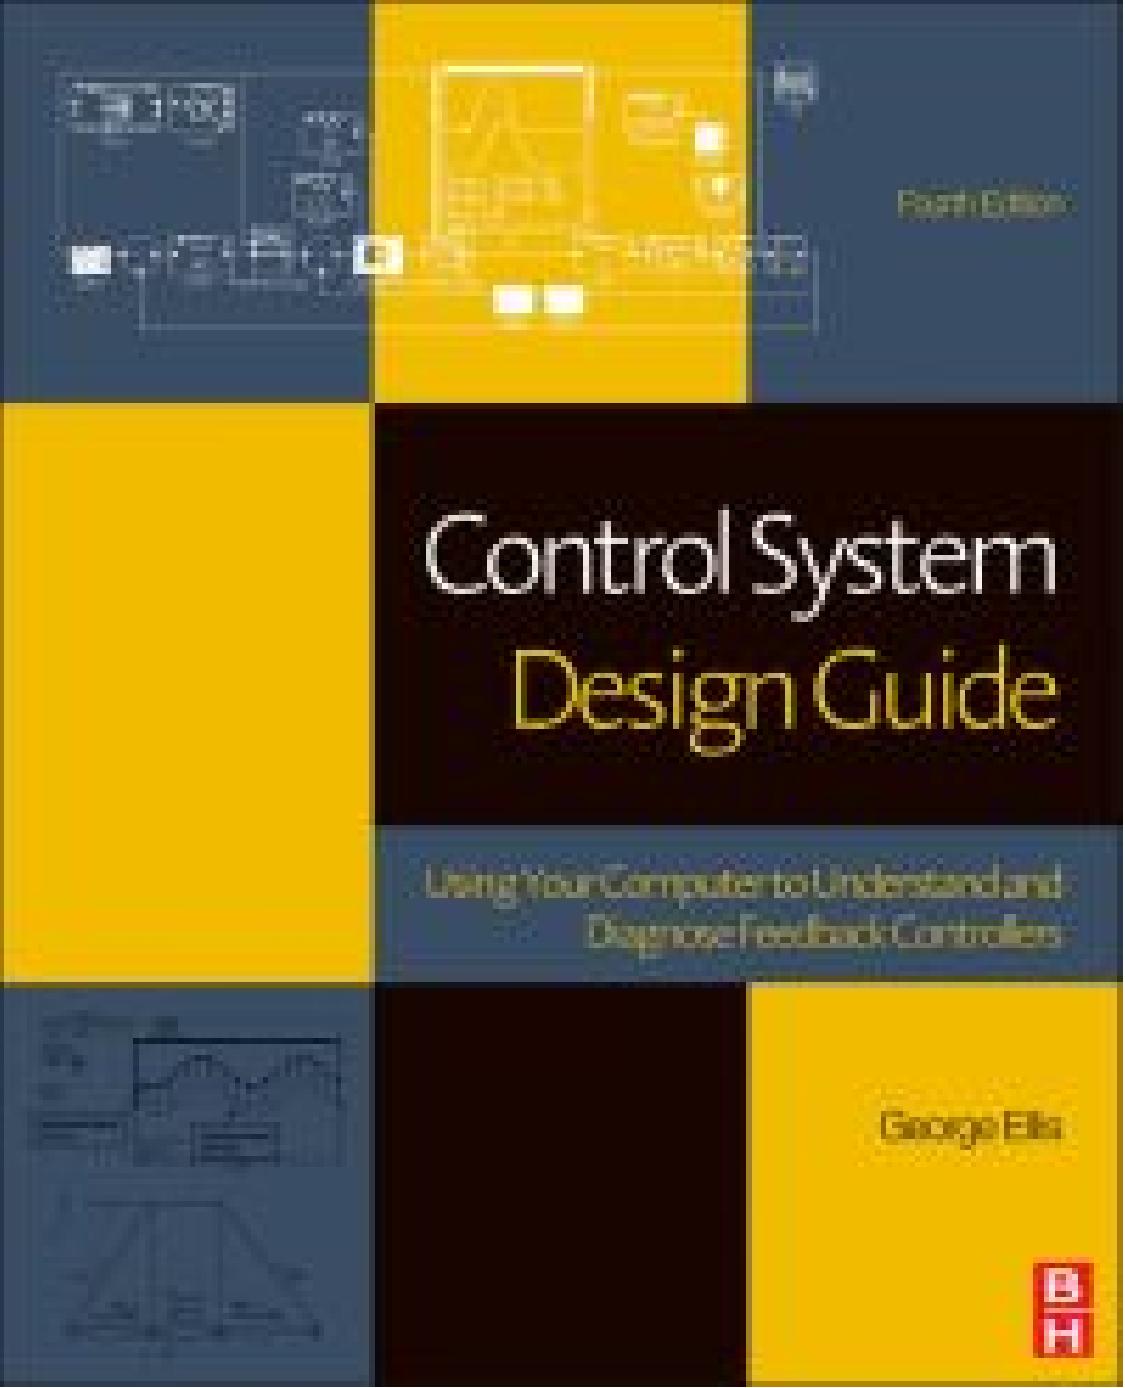 Control System Design Guide Using Your Computer to Understand  Diagnose Feedback Controllers 4th Edition by George Ellis (1).jpg